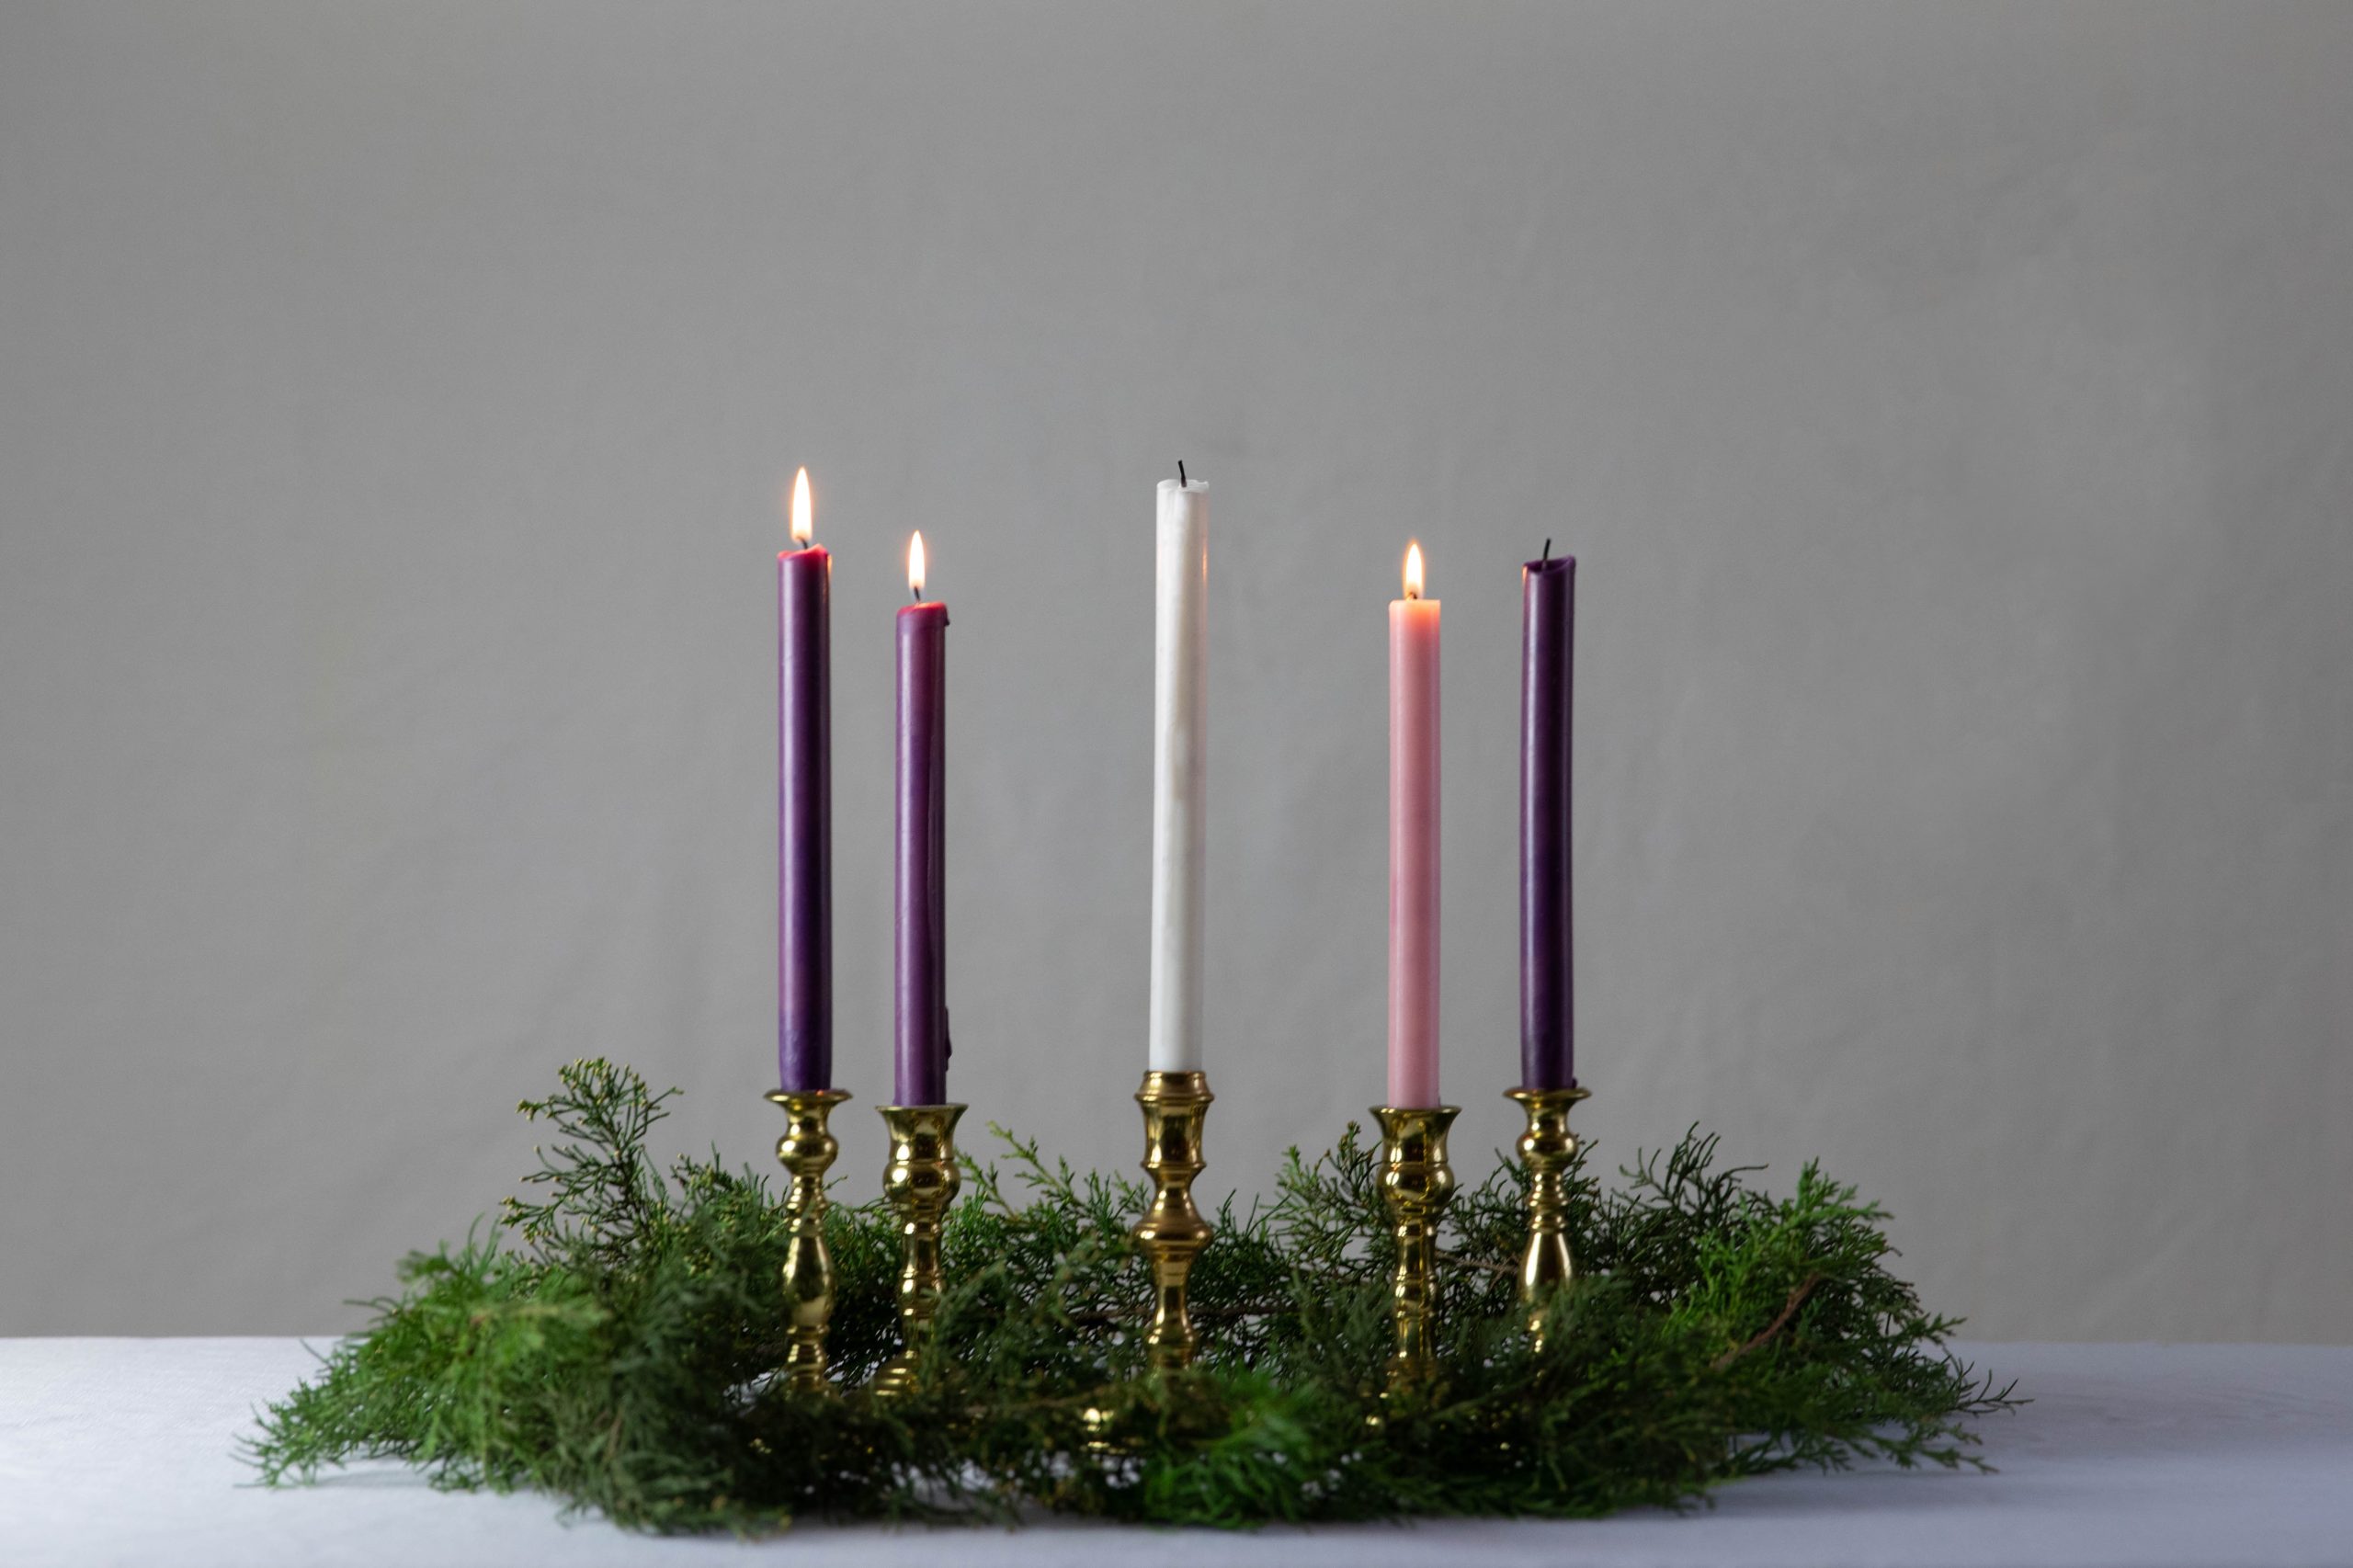 As we walk through this season of advent, we prepare our hearts for the coming of Christ. We should live as His light in the world.